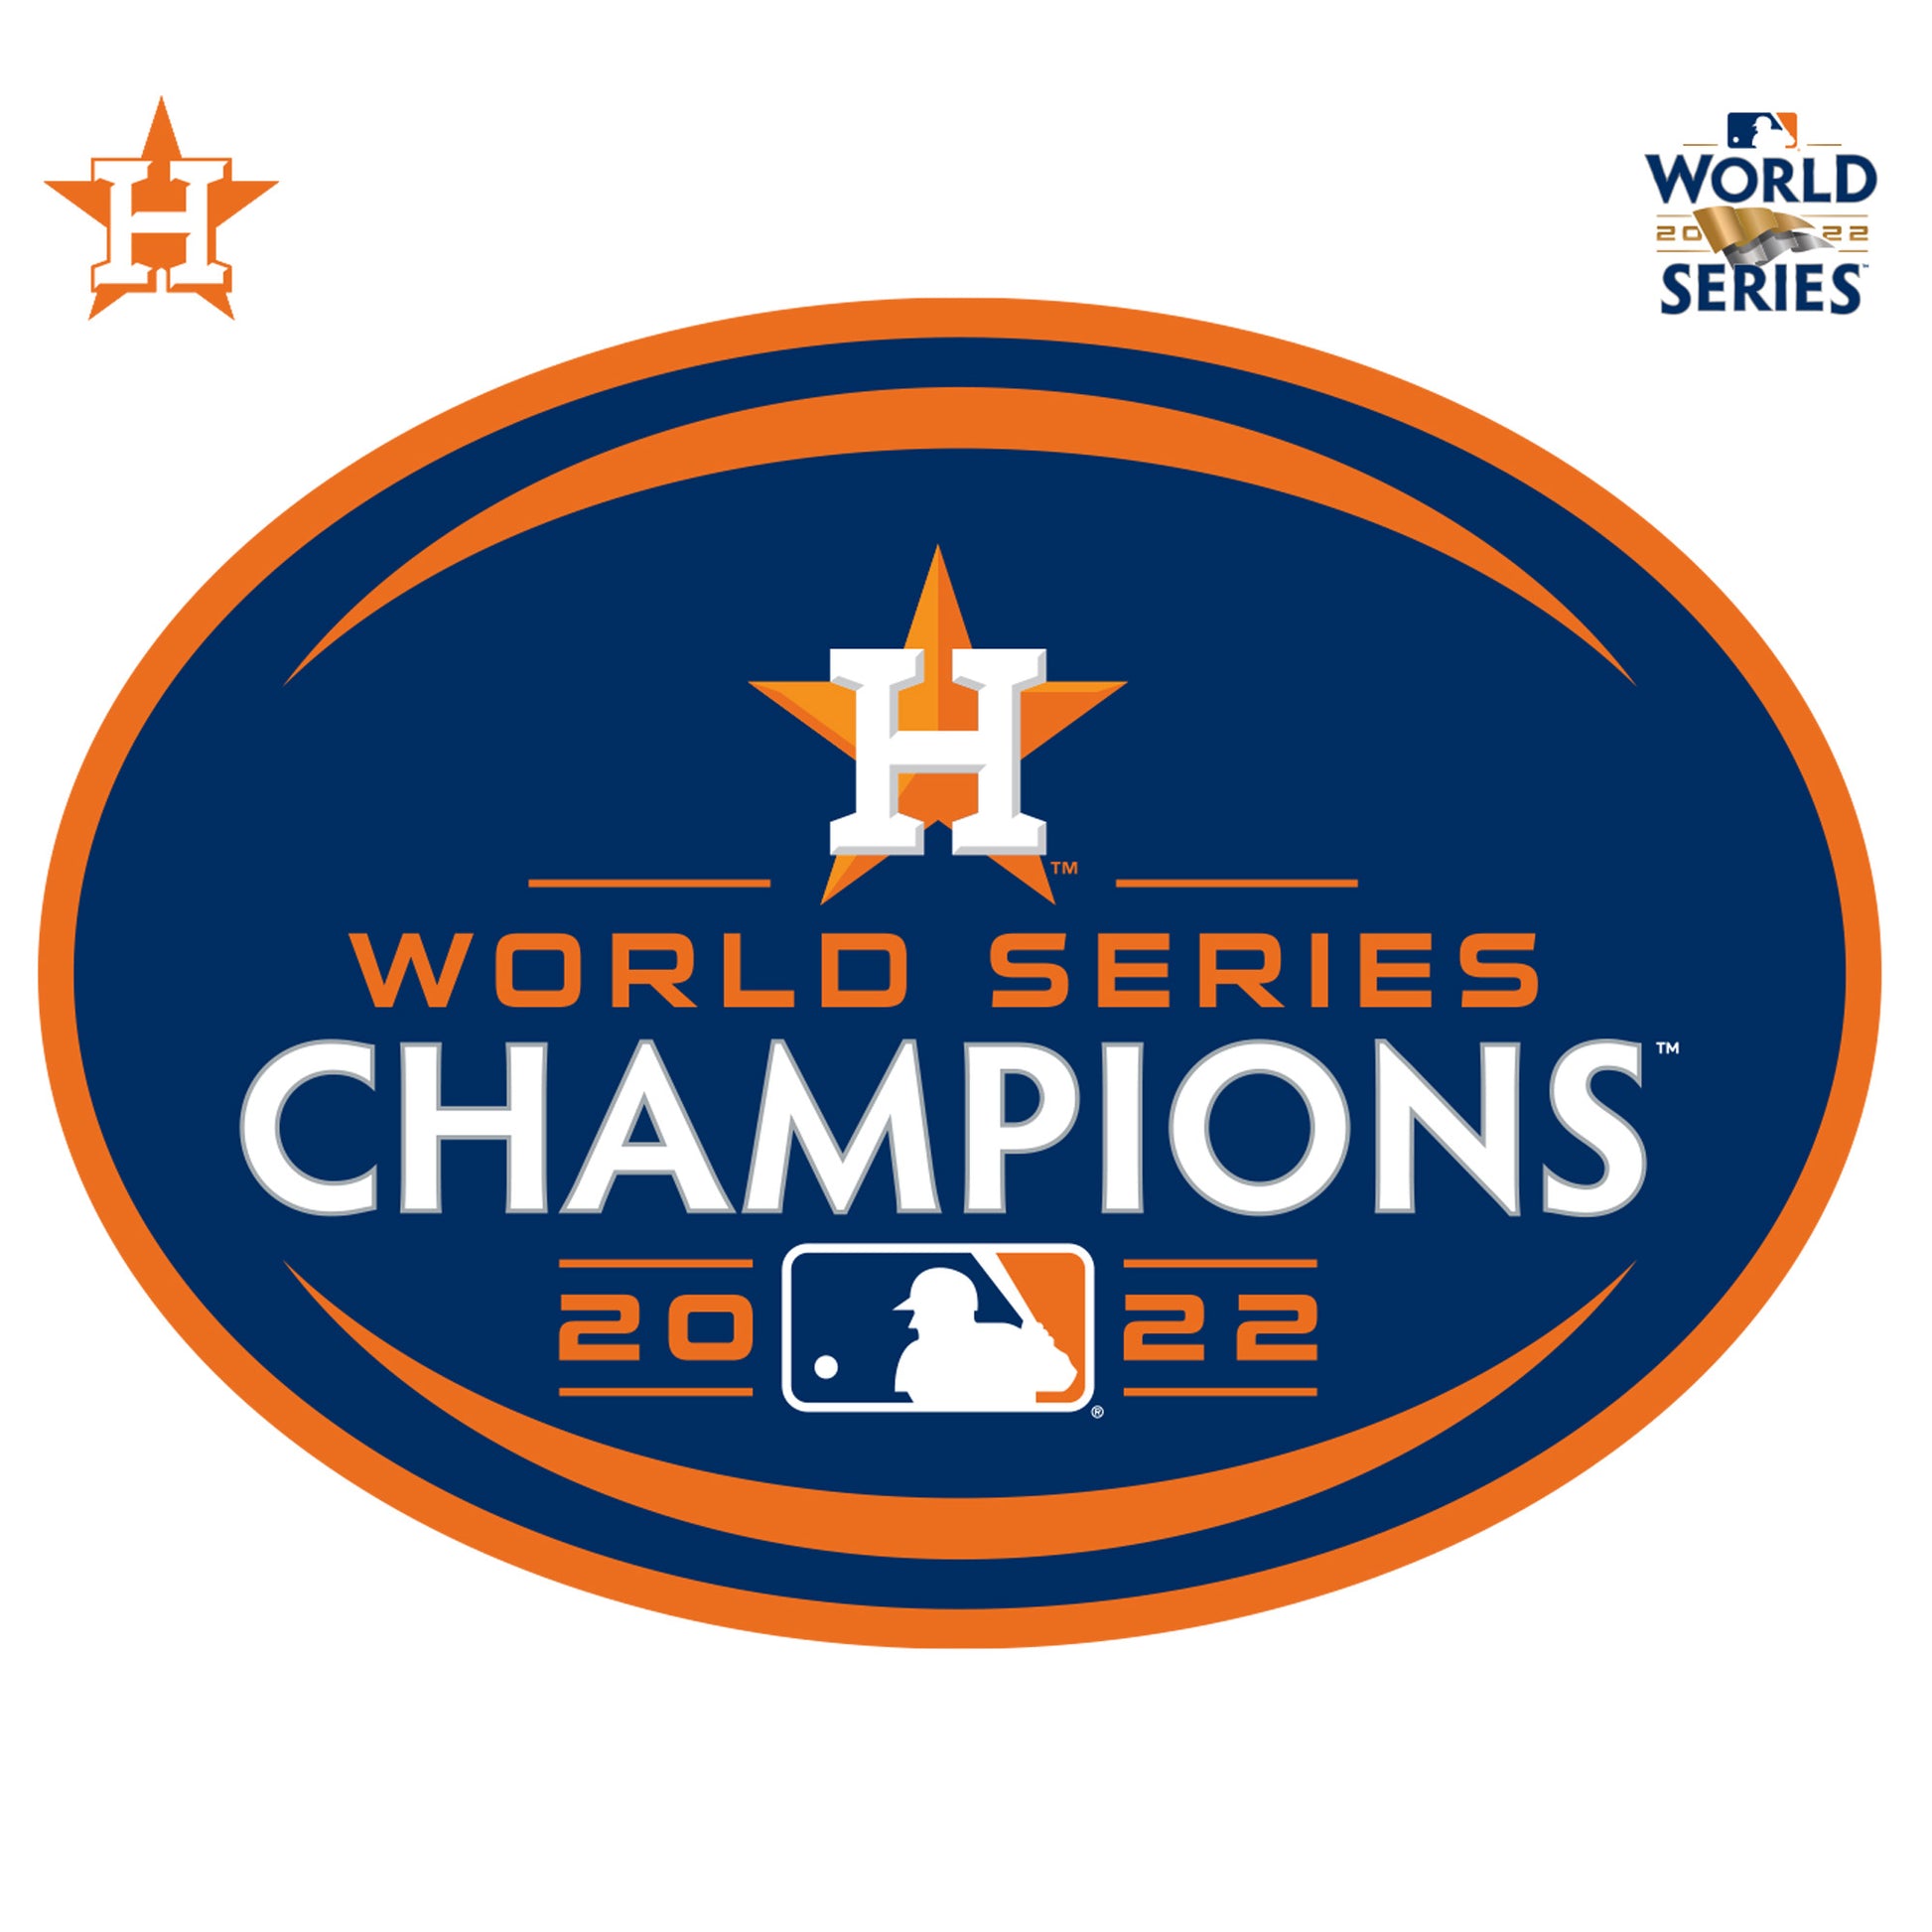 Get a peek at the Houston Astros World Series Championship gear you can own